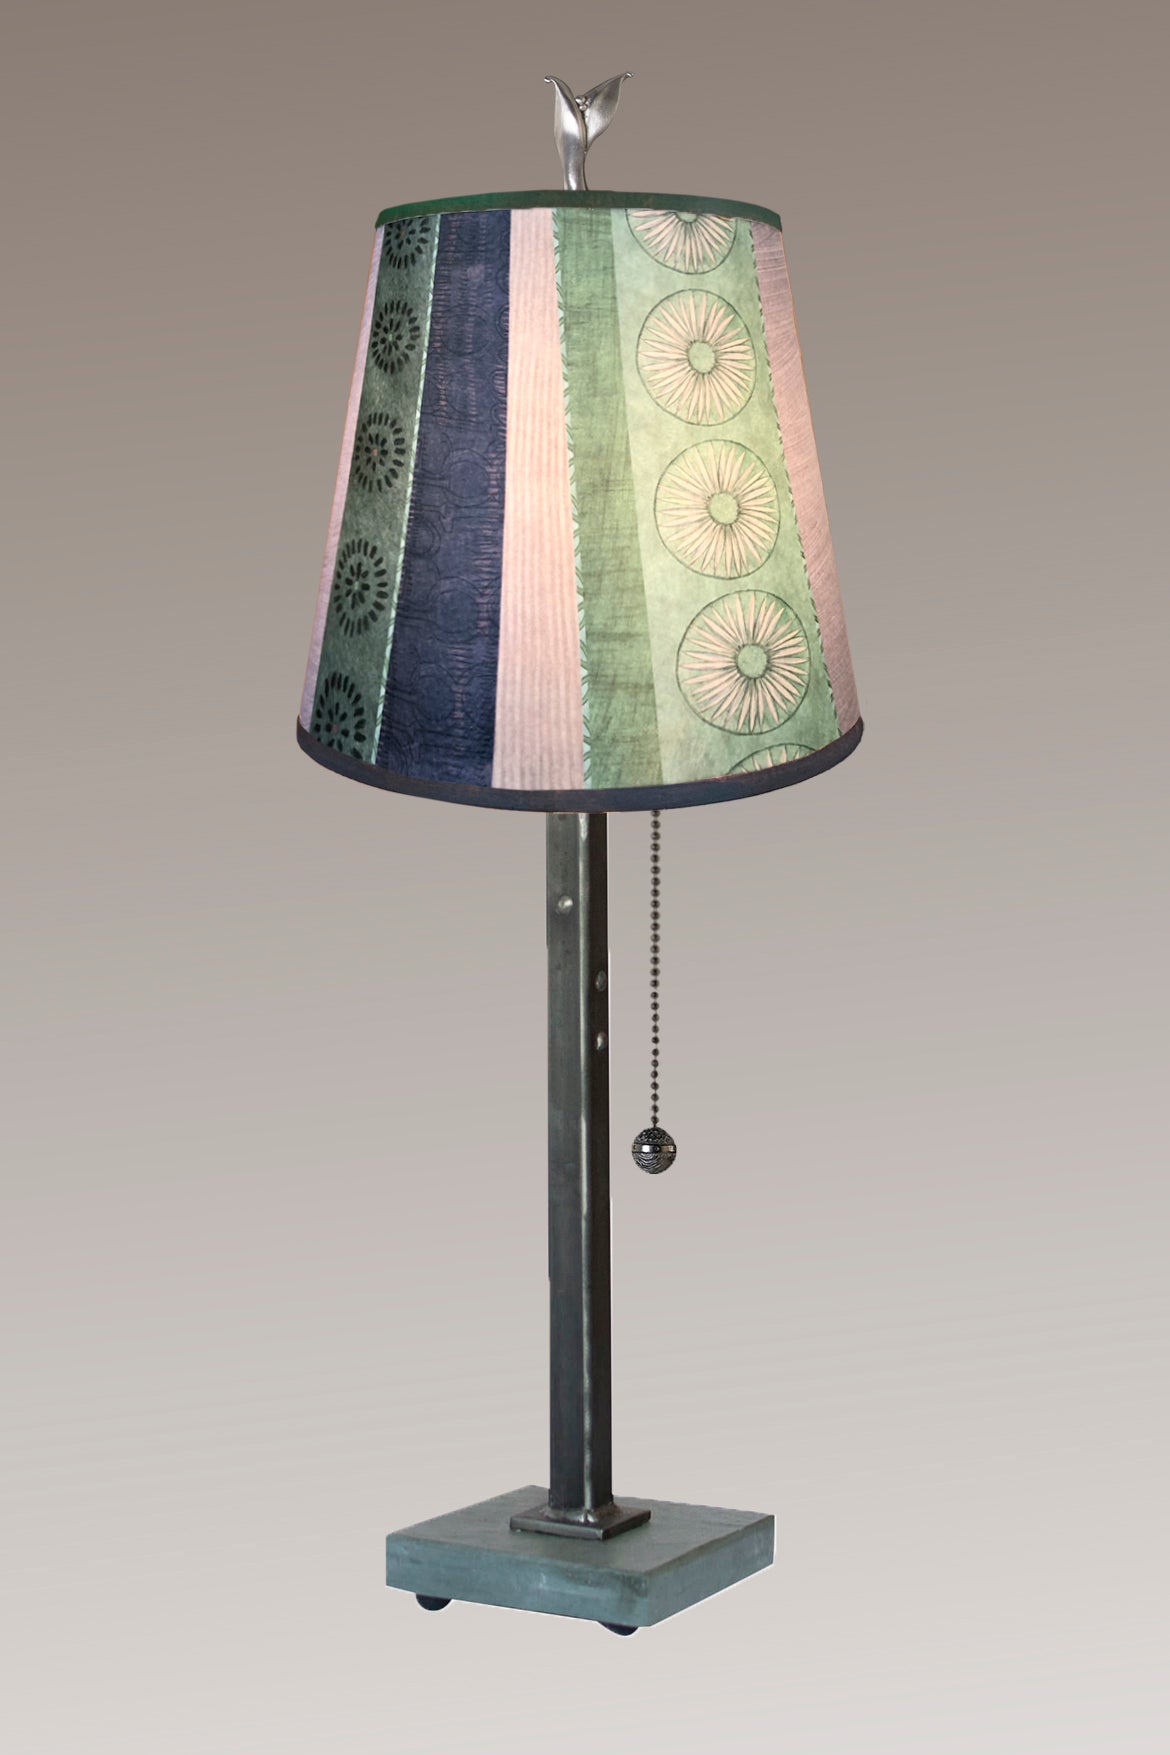 Janna Ugone &amp; Co Table Lamps Steel Table Lamp with Small Drum Shade in Serape Waters